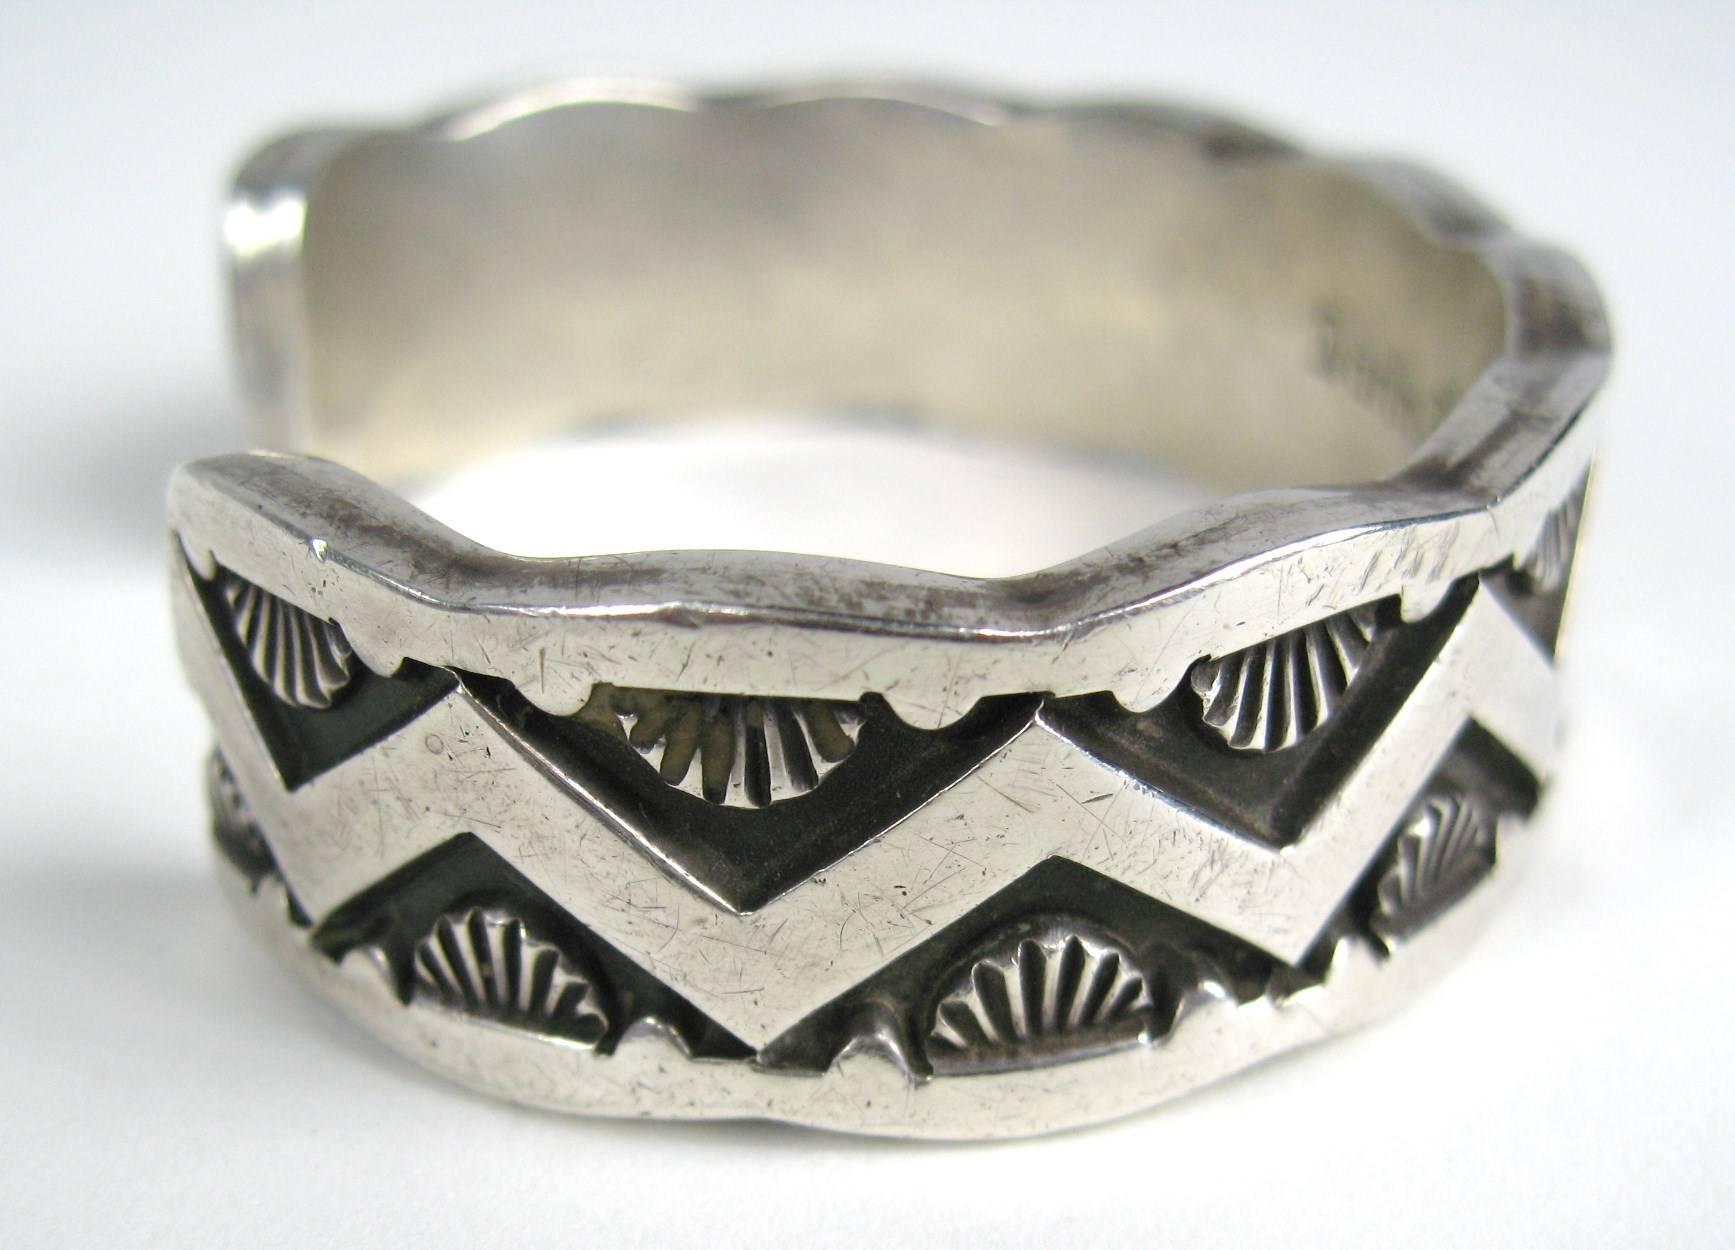 Stunning craftsmanship on this Darin Bill sterling Silver cuff bracelet. Intricate design which will be perfect for both men and woman. 
A famous Navajo artist who has a very recognizable style. He only creates "heavy" bracelets which is